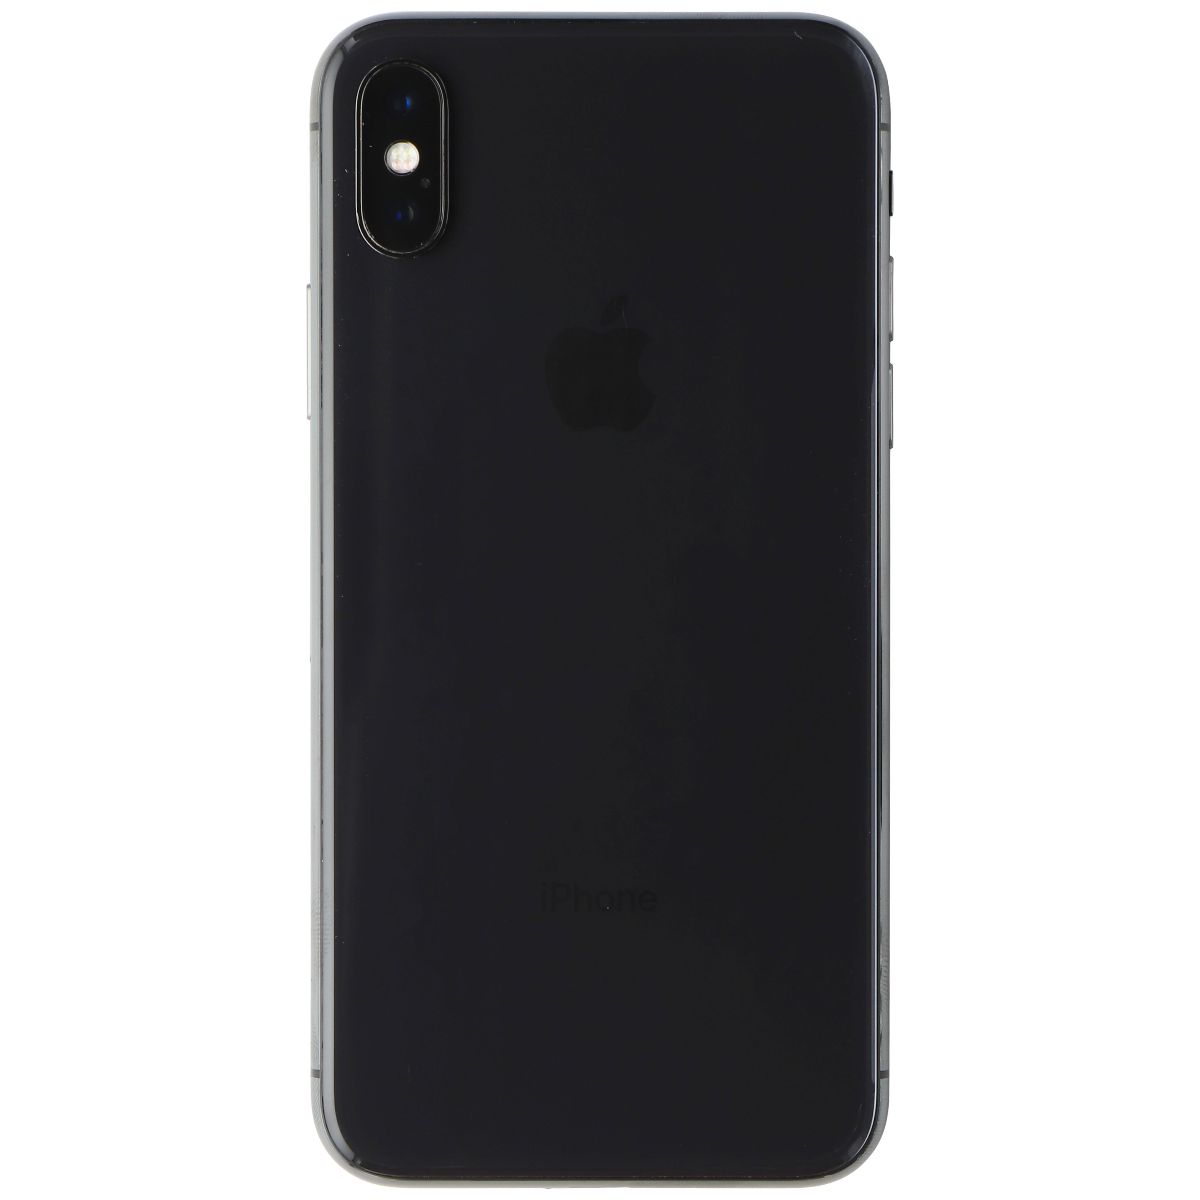 Apple iPhone X (5.8-inch) (A1901) Unlocked - 256GB / Space Gray - Bad Face ID* Cell Phones & Smartphones Apple    - Simple Cell Bulk Wholesale Pricing - USA Seller